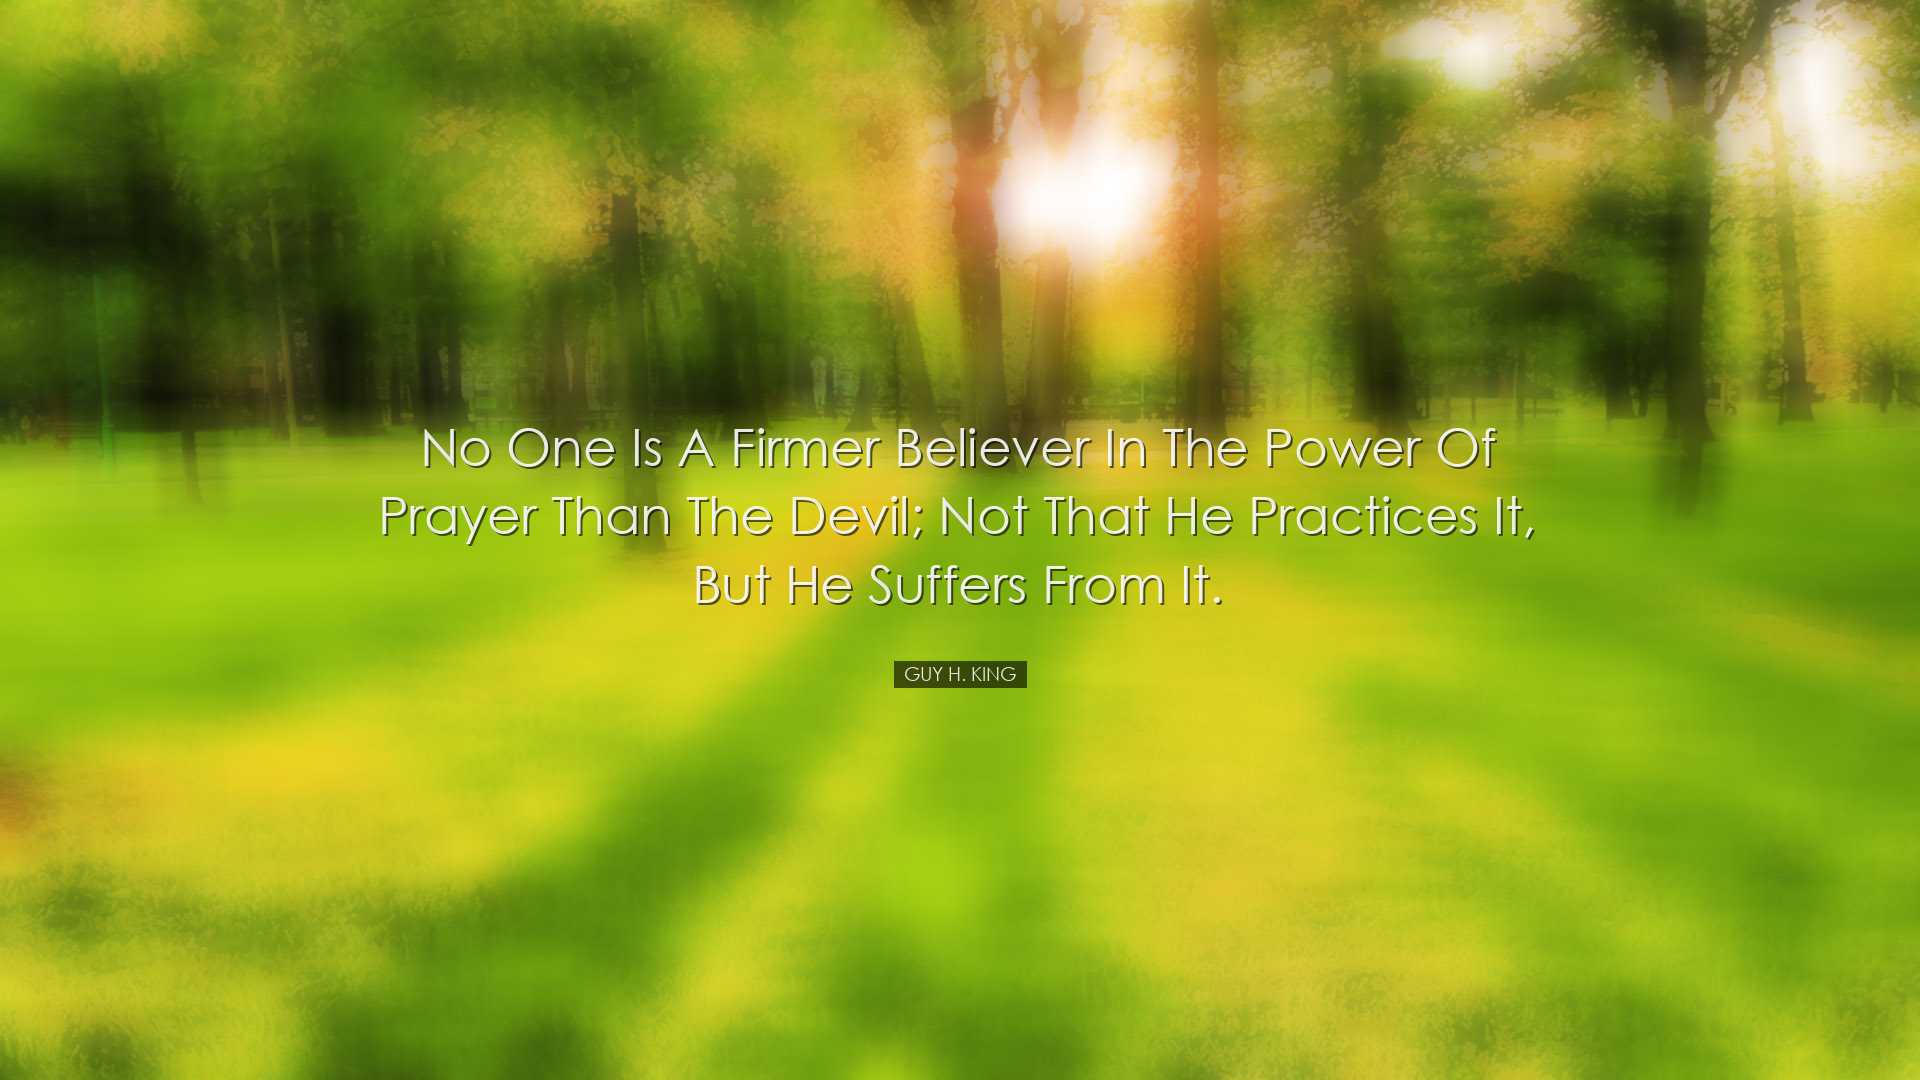 No one is a firmer believer in the power of prayer than the devil;